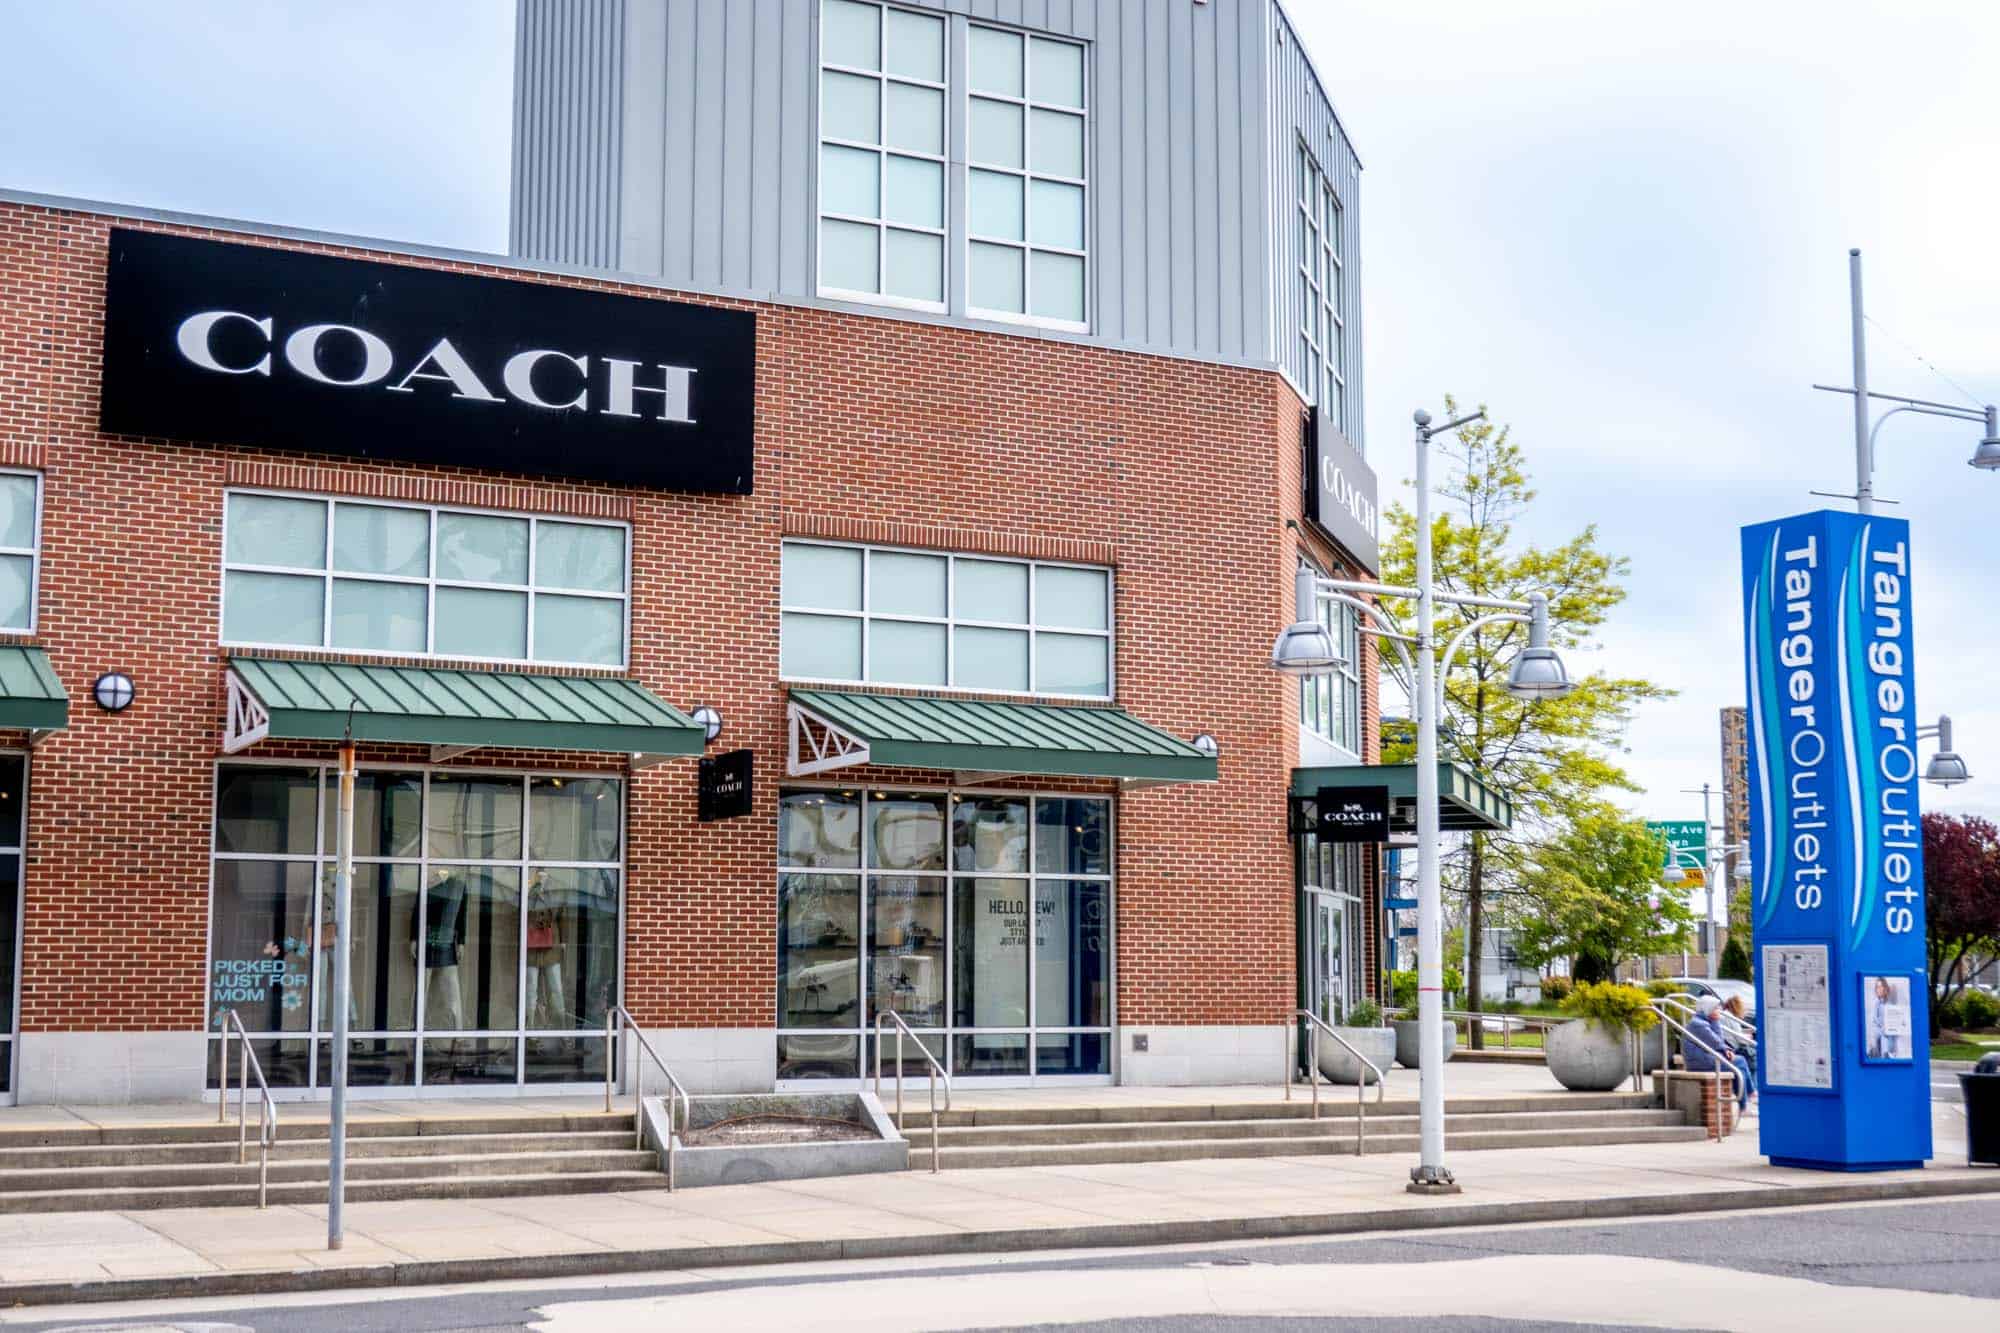 Brick building with green awnings and a sign for "Coach" next to a blue pillar with a sign for "Tanger Outlets"